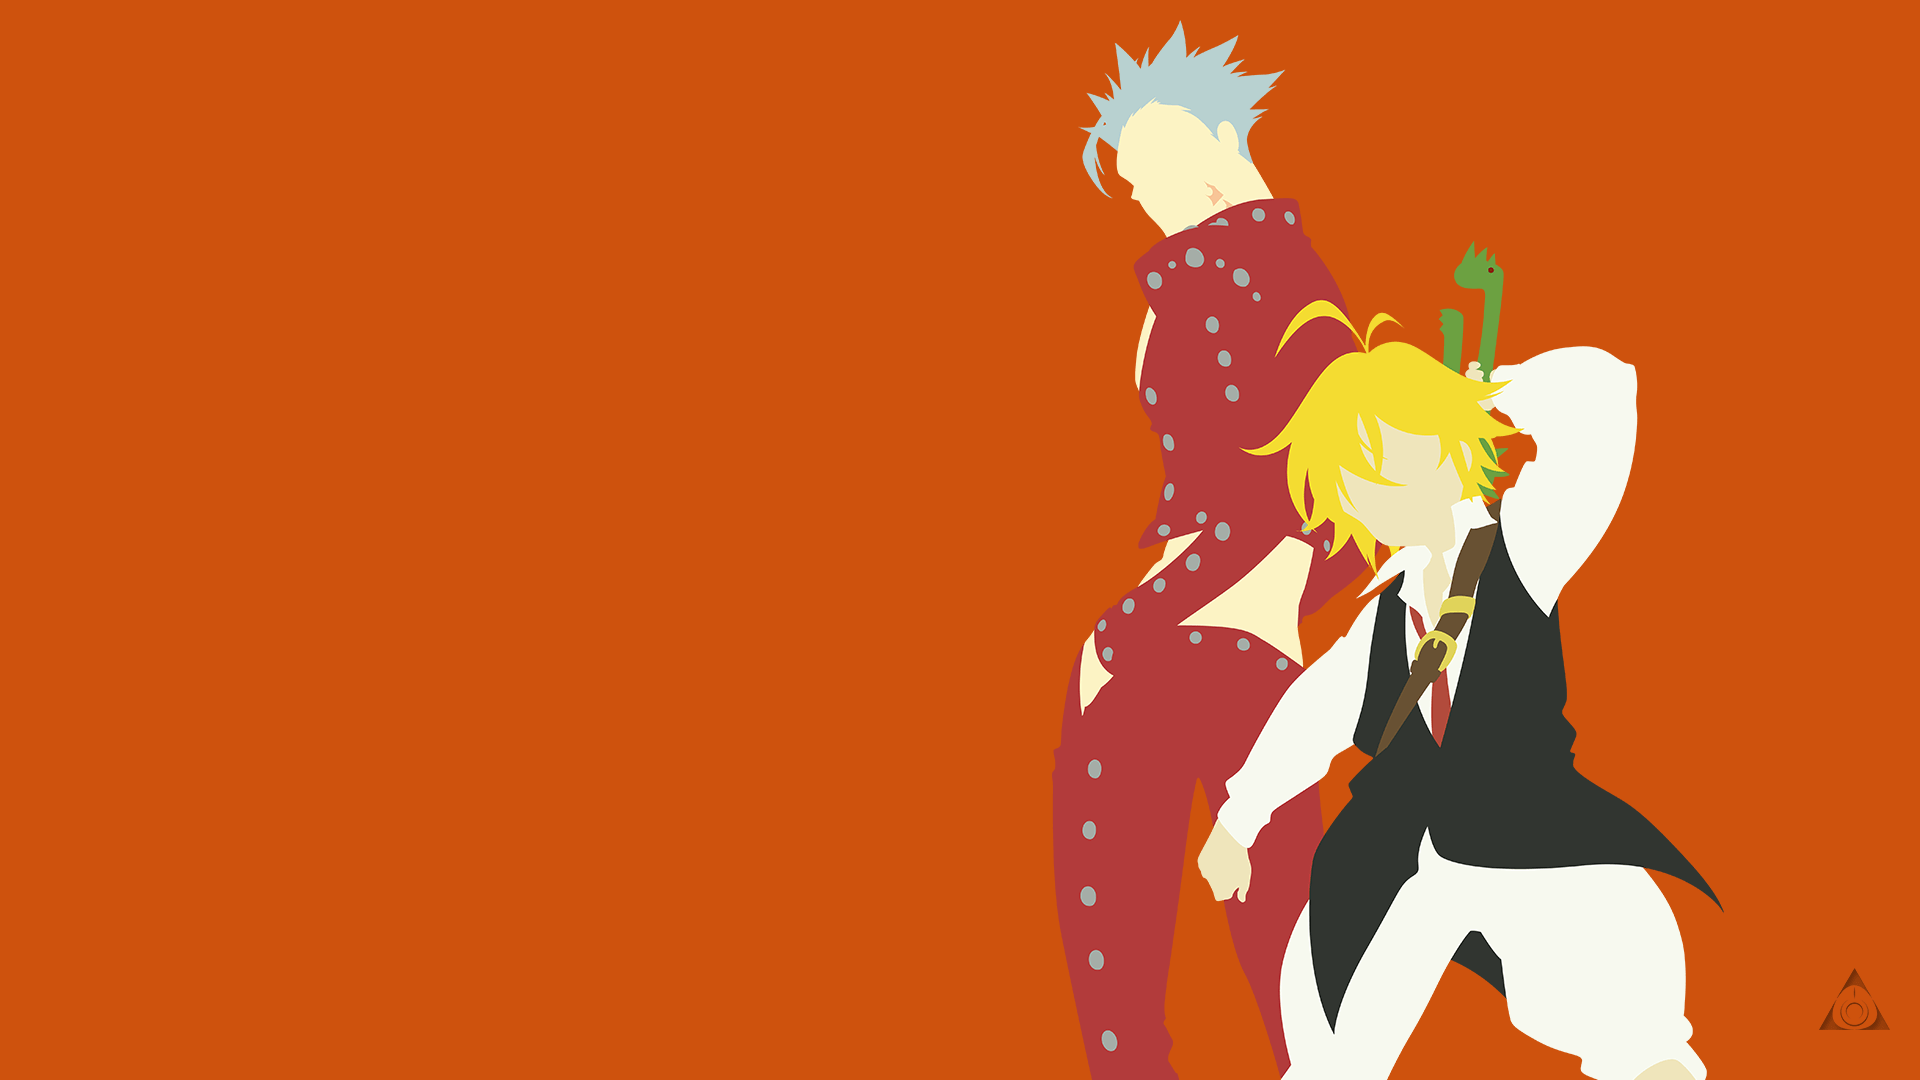 Does anybody have any good wallpaper, for seven deadly sins? This